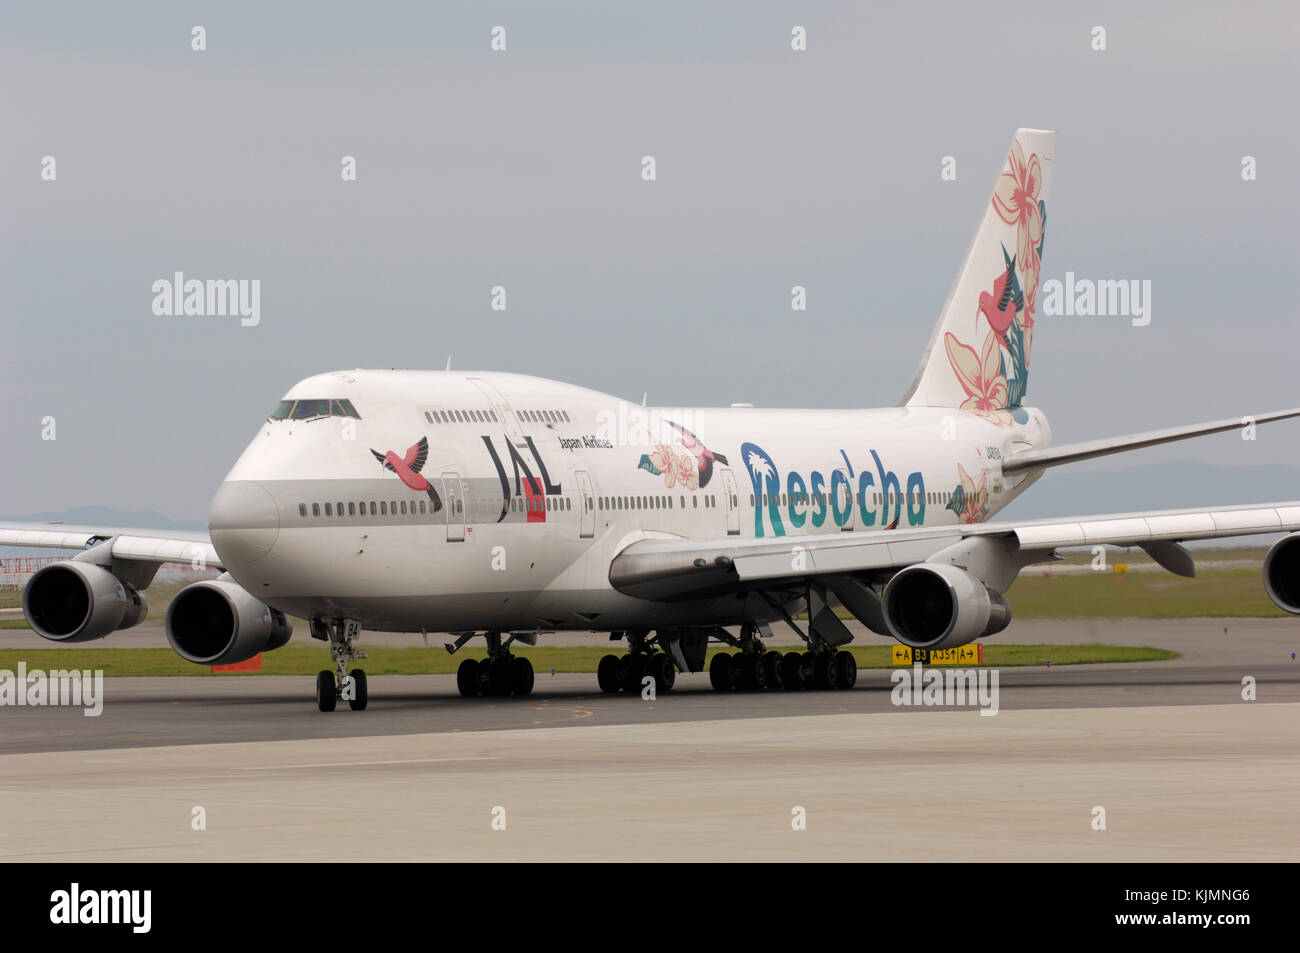 tropical birds special-livery Reso'cha Stock Photo